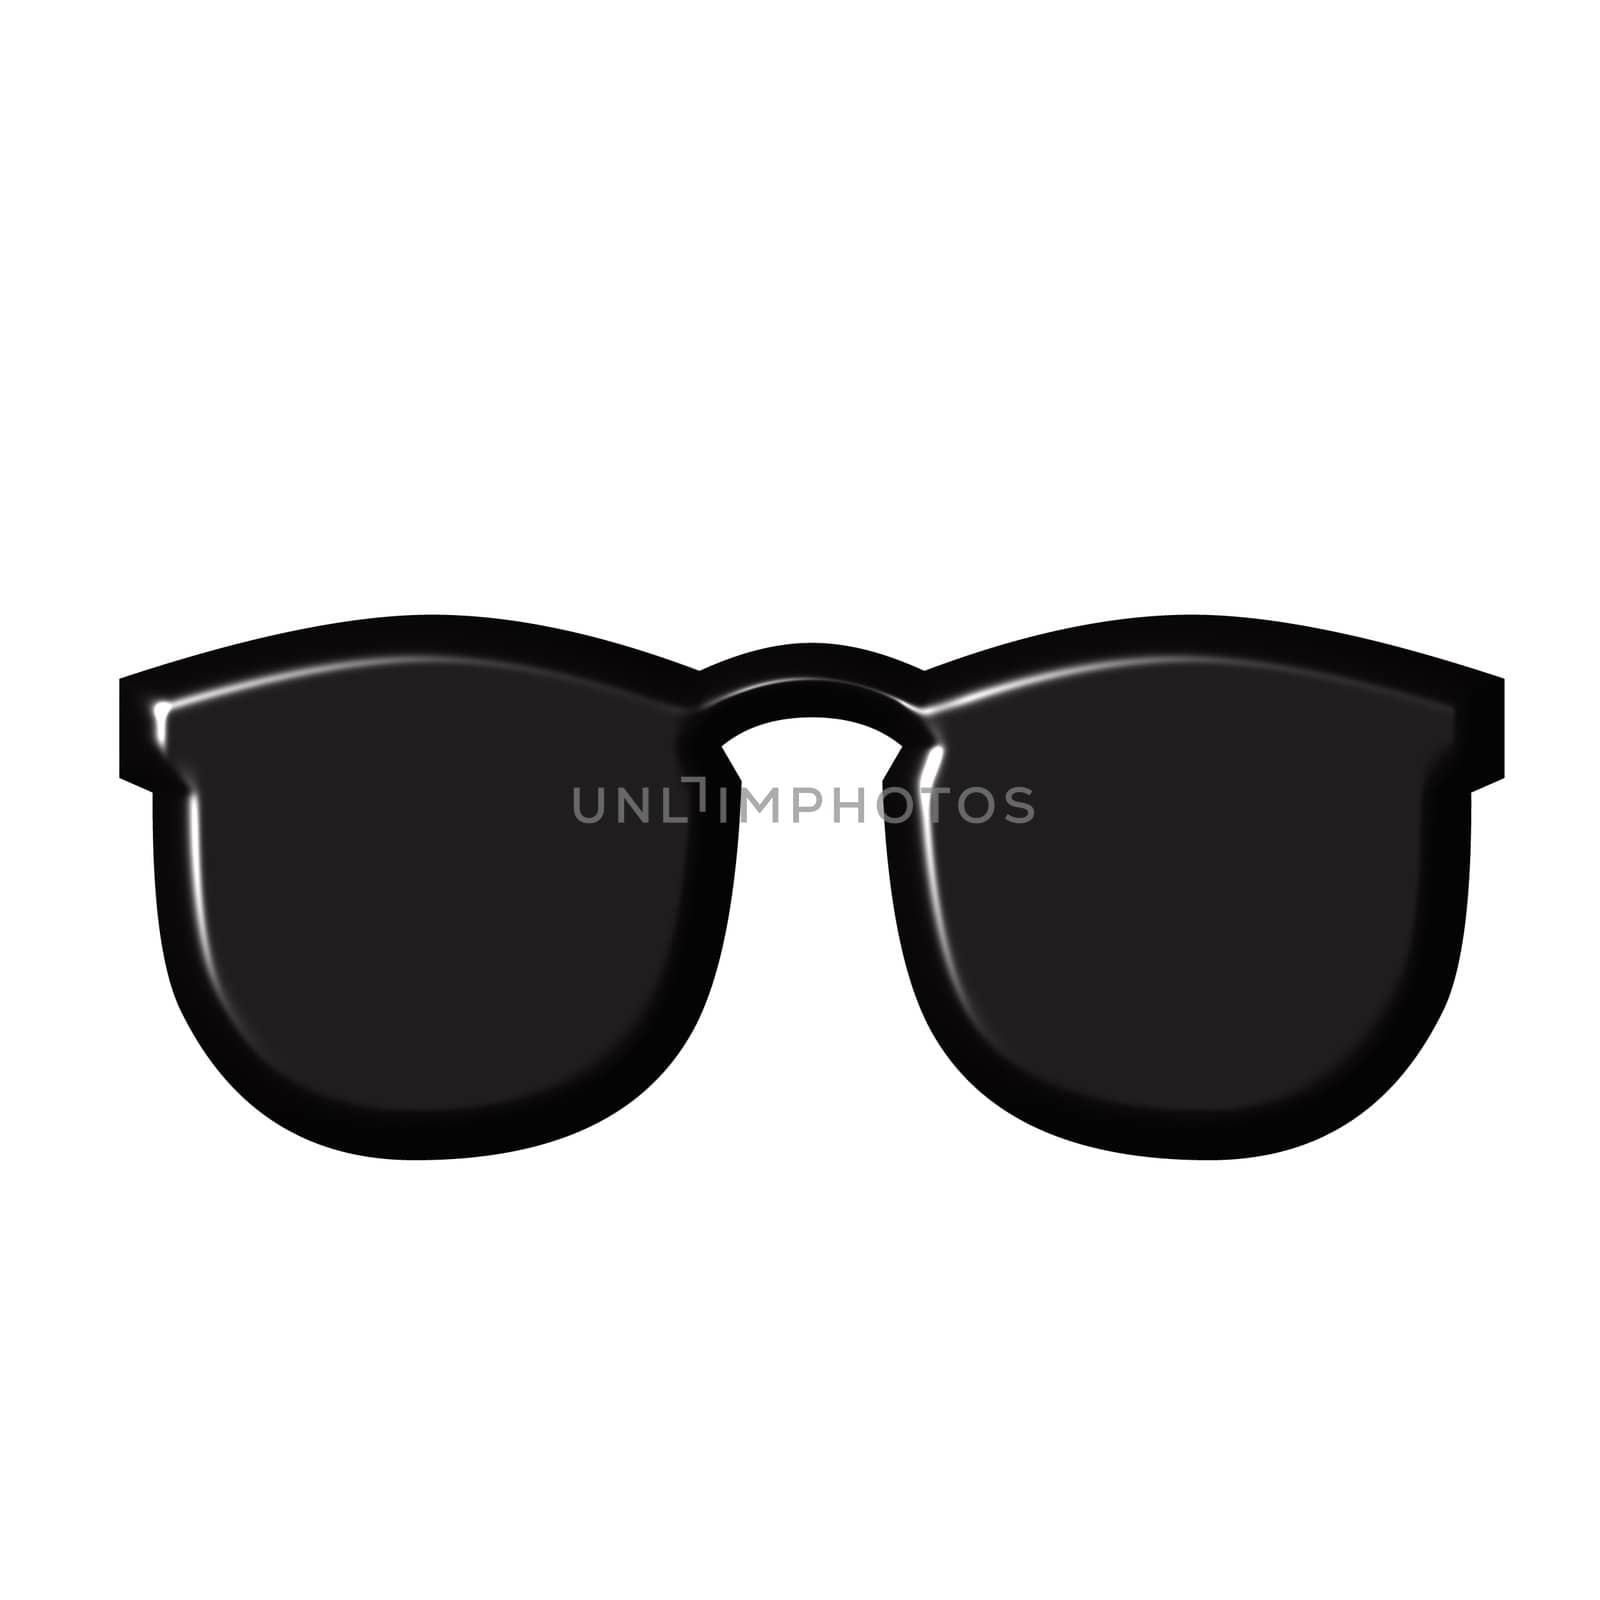 Sunglasses isolated in white